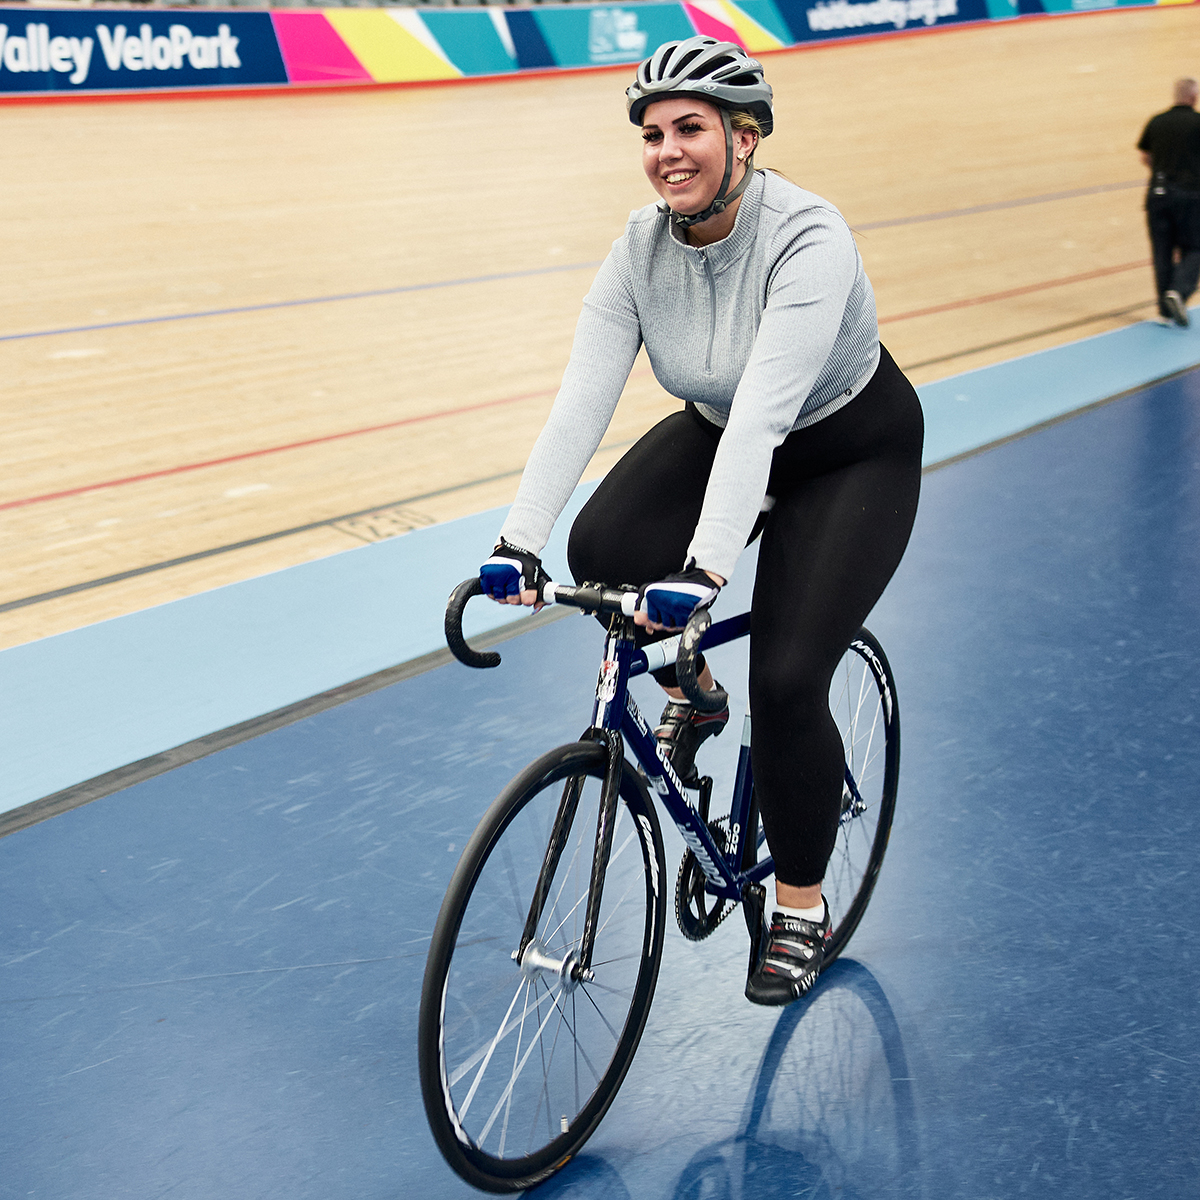 Join our women-only track session, welcoming riders of all levels! No accreditation required, just a passion for cycling. Enjoy tailored activities blending sprint and endurance. 🚴‍♀️💪 Book today 👉 brnw.ch/21wJ4HM